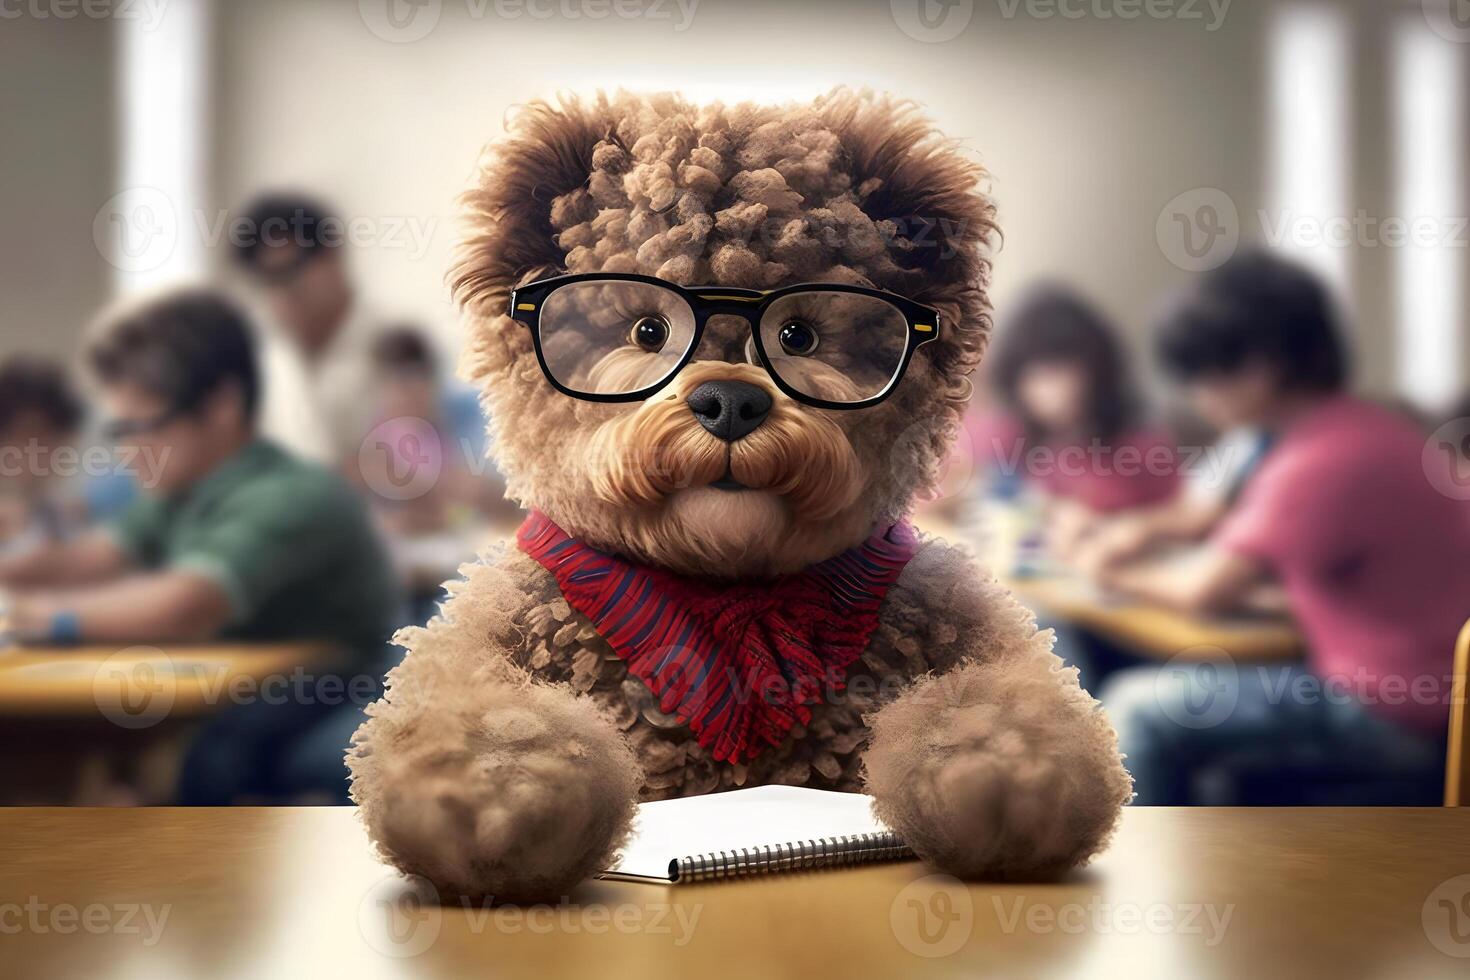 Teddy bear as a student at school. Back to school. Neural network photo